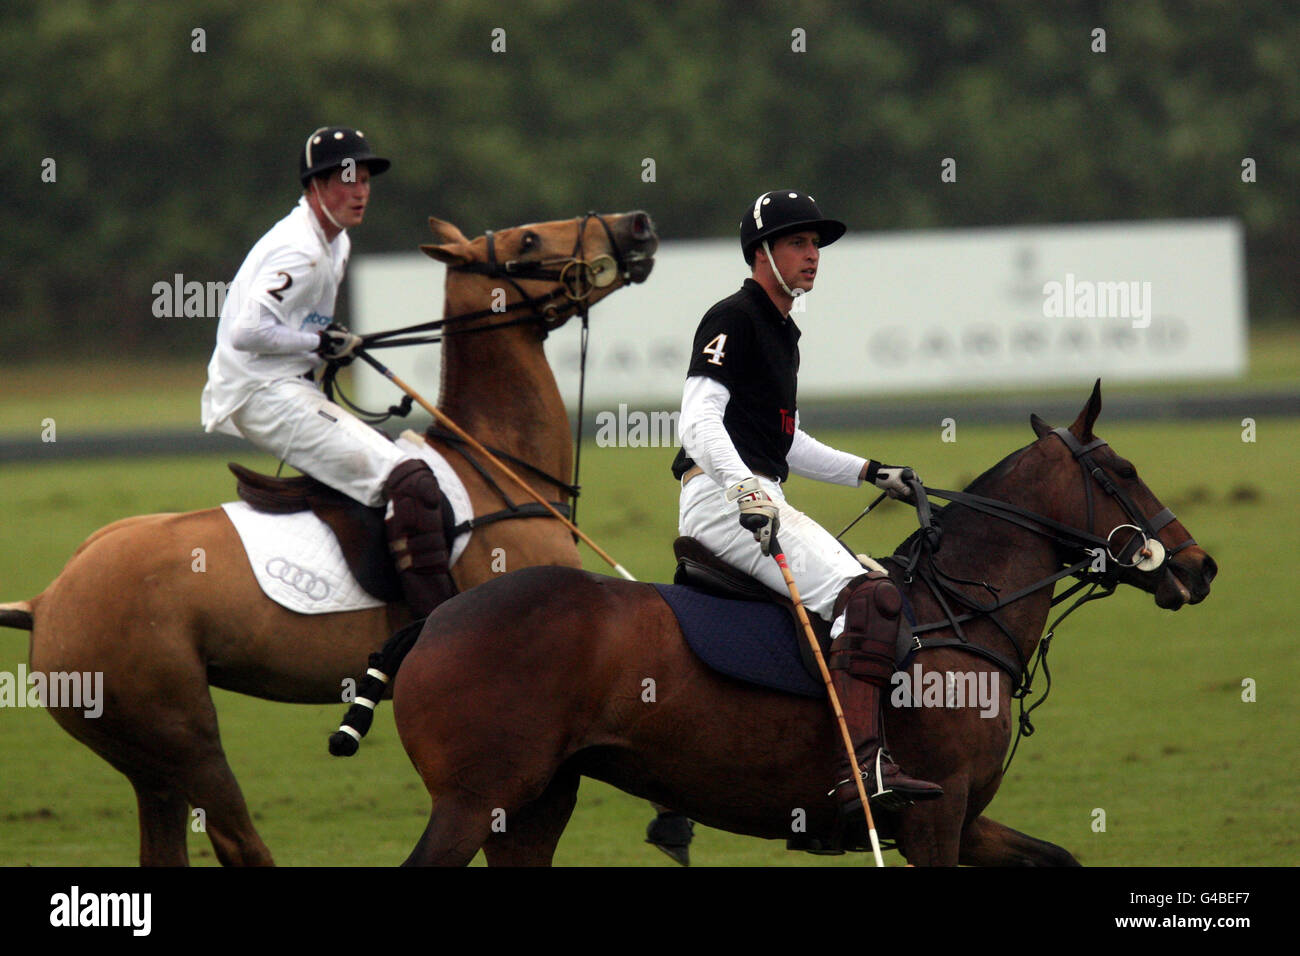 The Duke of Cambridge (Black 4) takes part in a charity polo tournament against a team including his brother Prince Harry (White 2), in aid of disadvantaged African children, at Cowarth Park, Sunninghill, near Ascot. Stock Photo